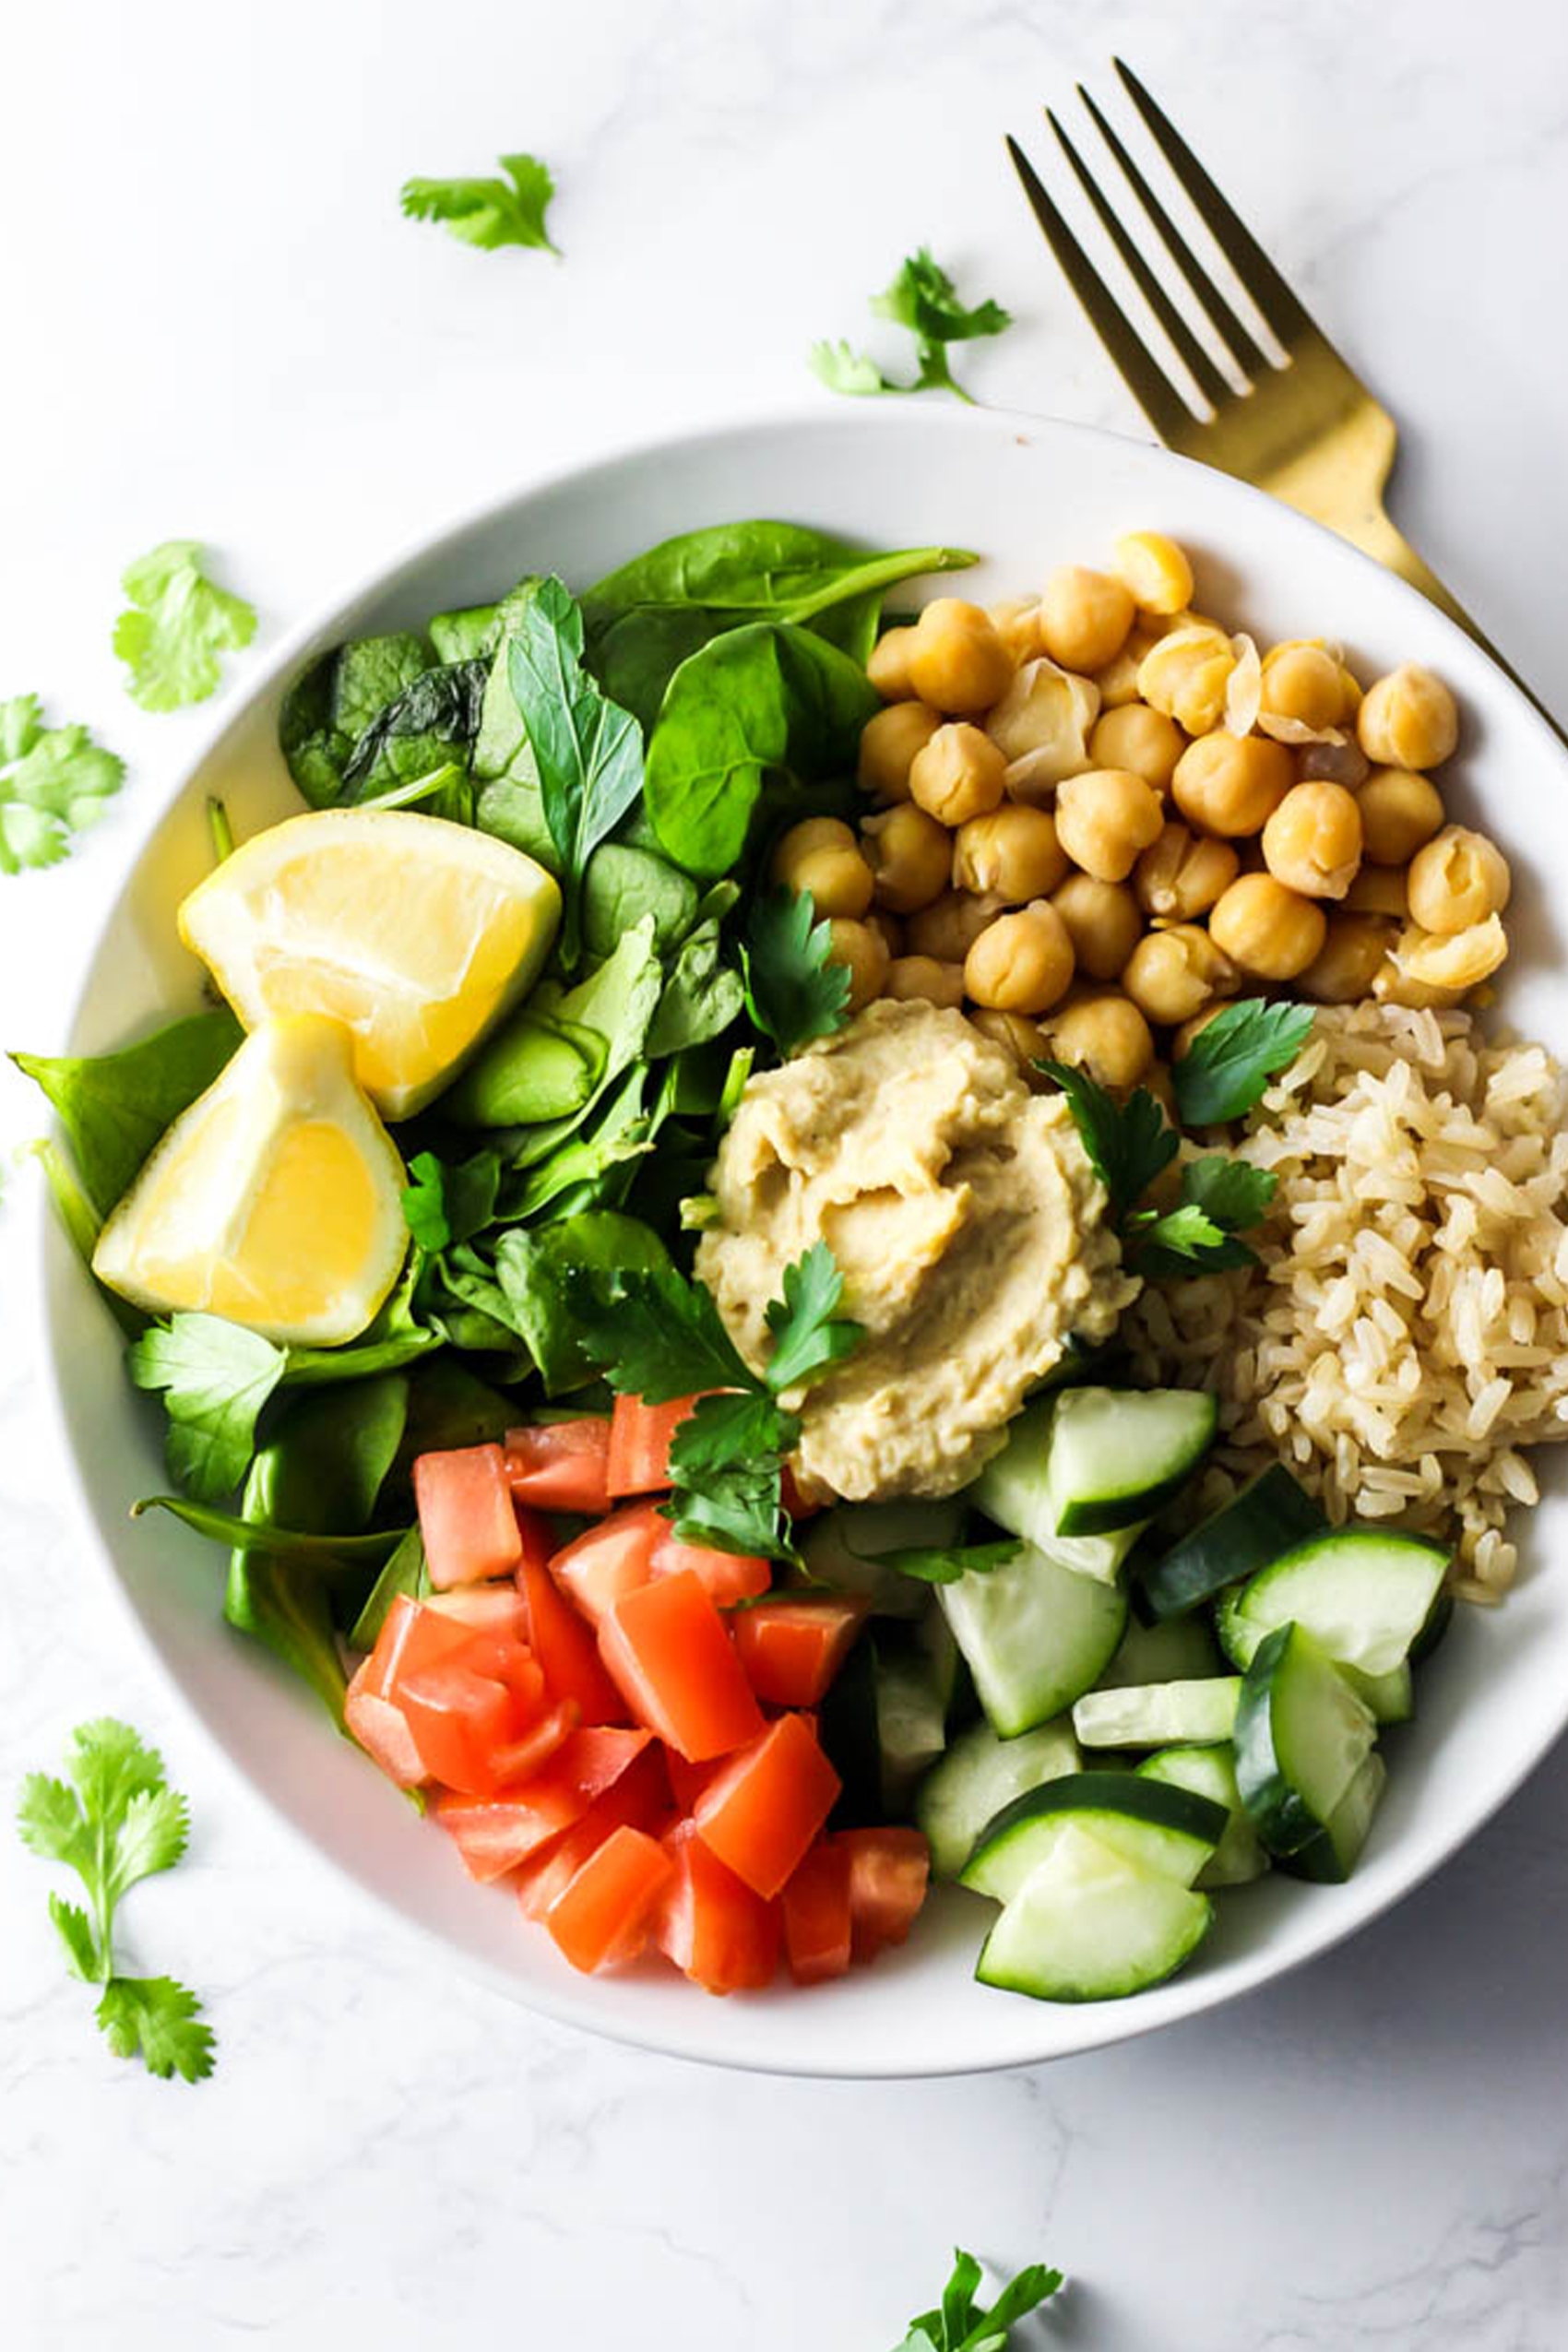 a bowl of spinach served with tomatoes, cucumber, chickpeas, rice, lemon wedges and hummus